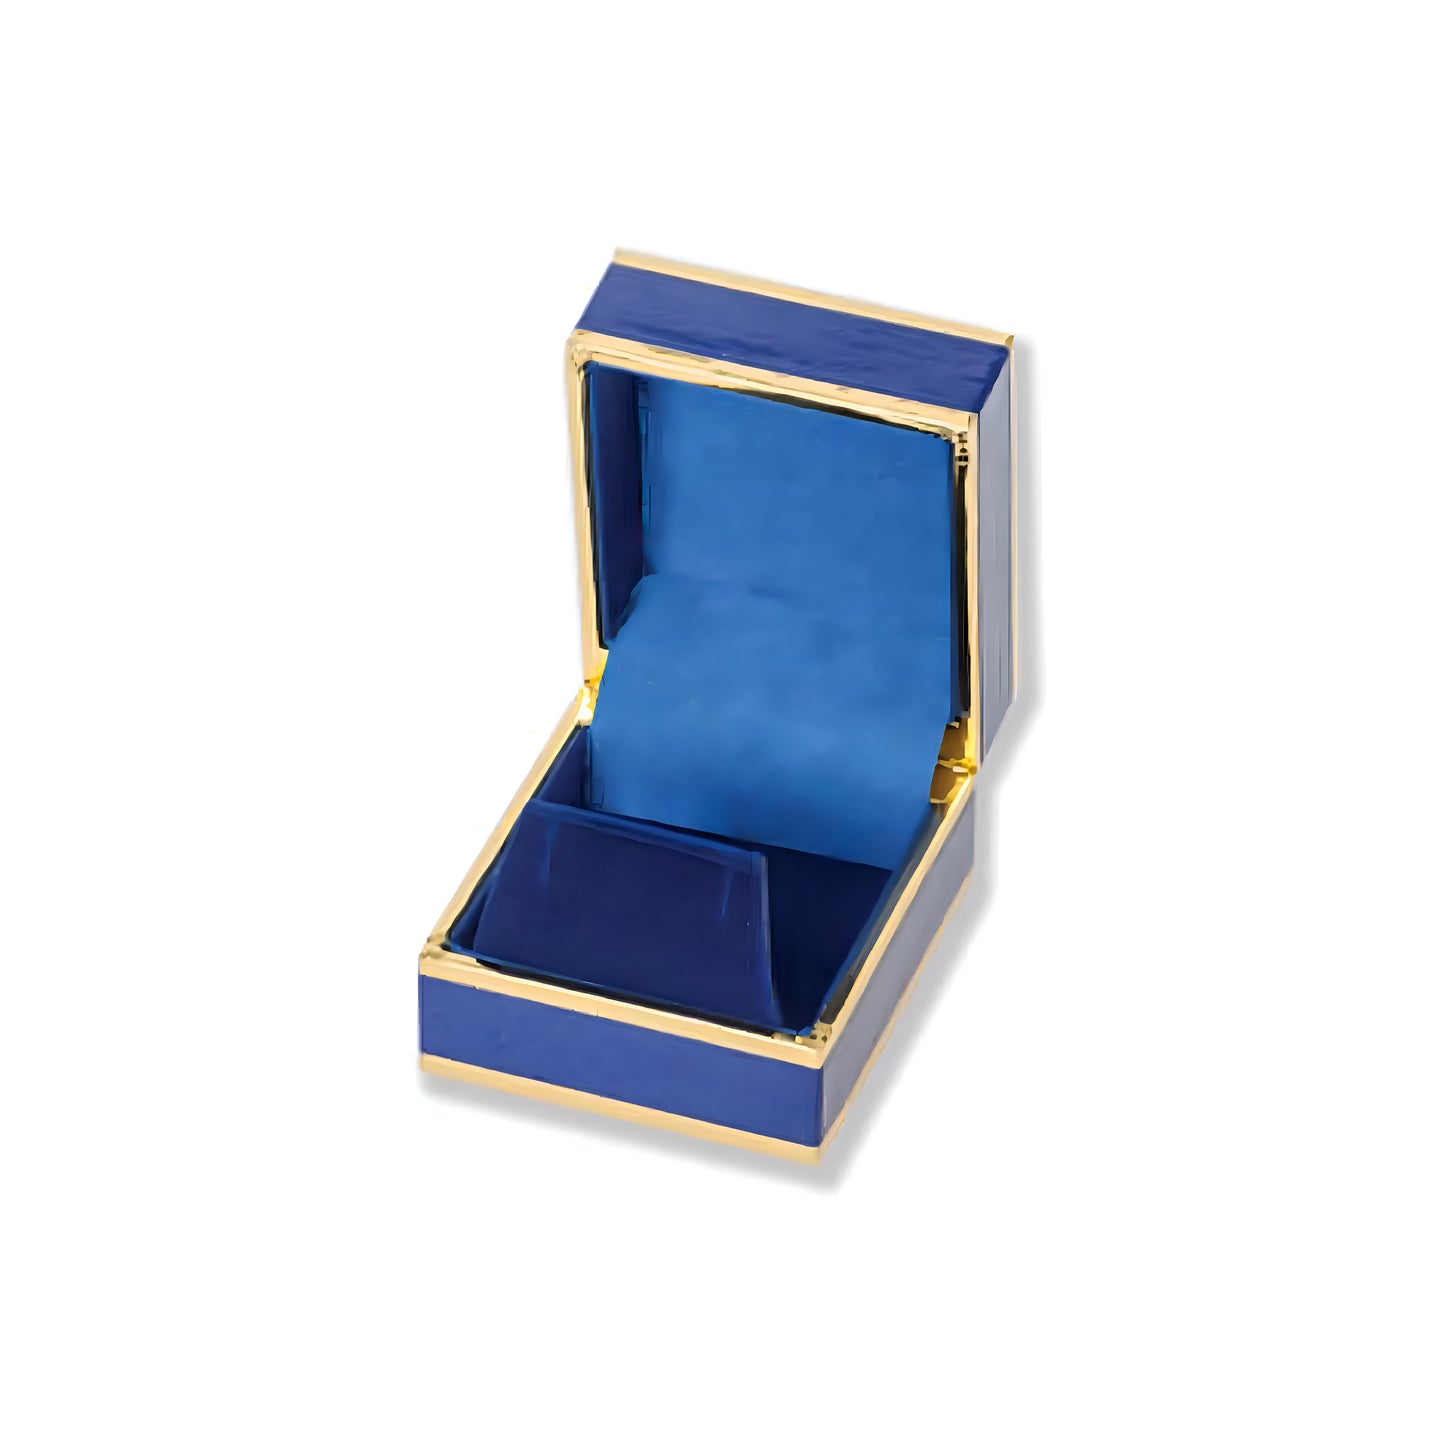 Monza Earring Box - Blue / Gold (Pack of 12)